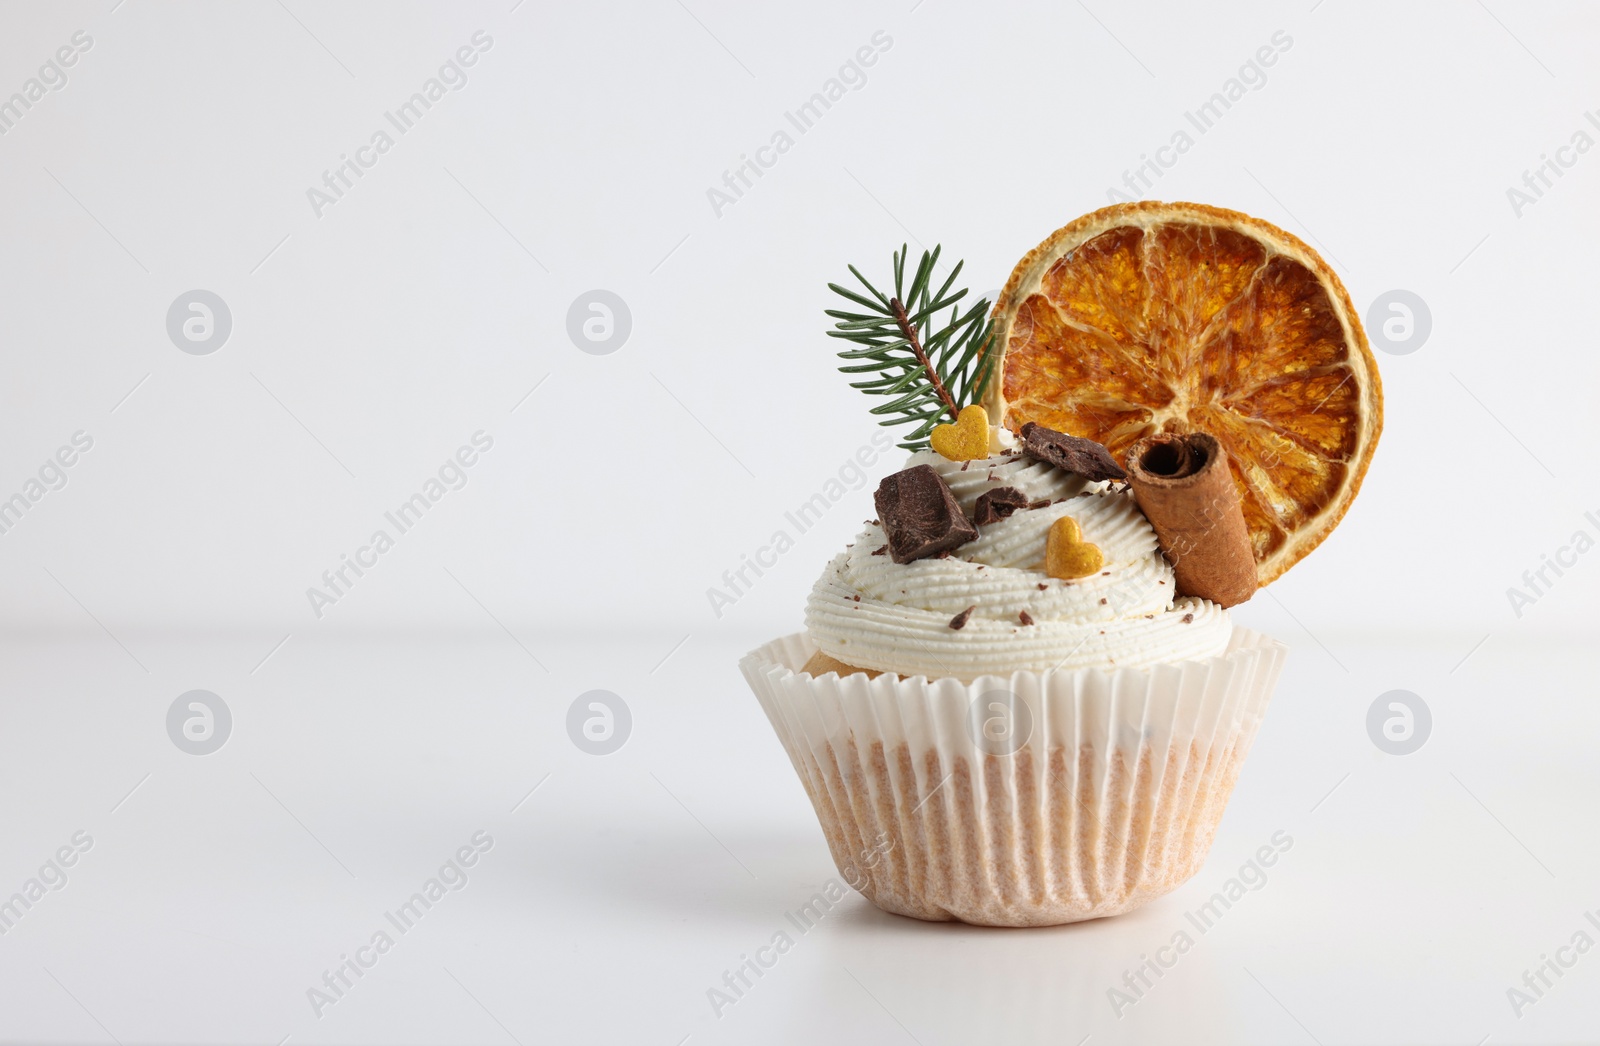 Photo of Tasty Christmas cupcake with cream and decor on white background, space for text